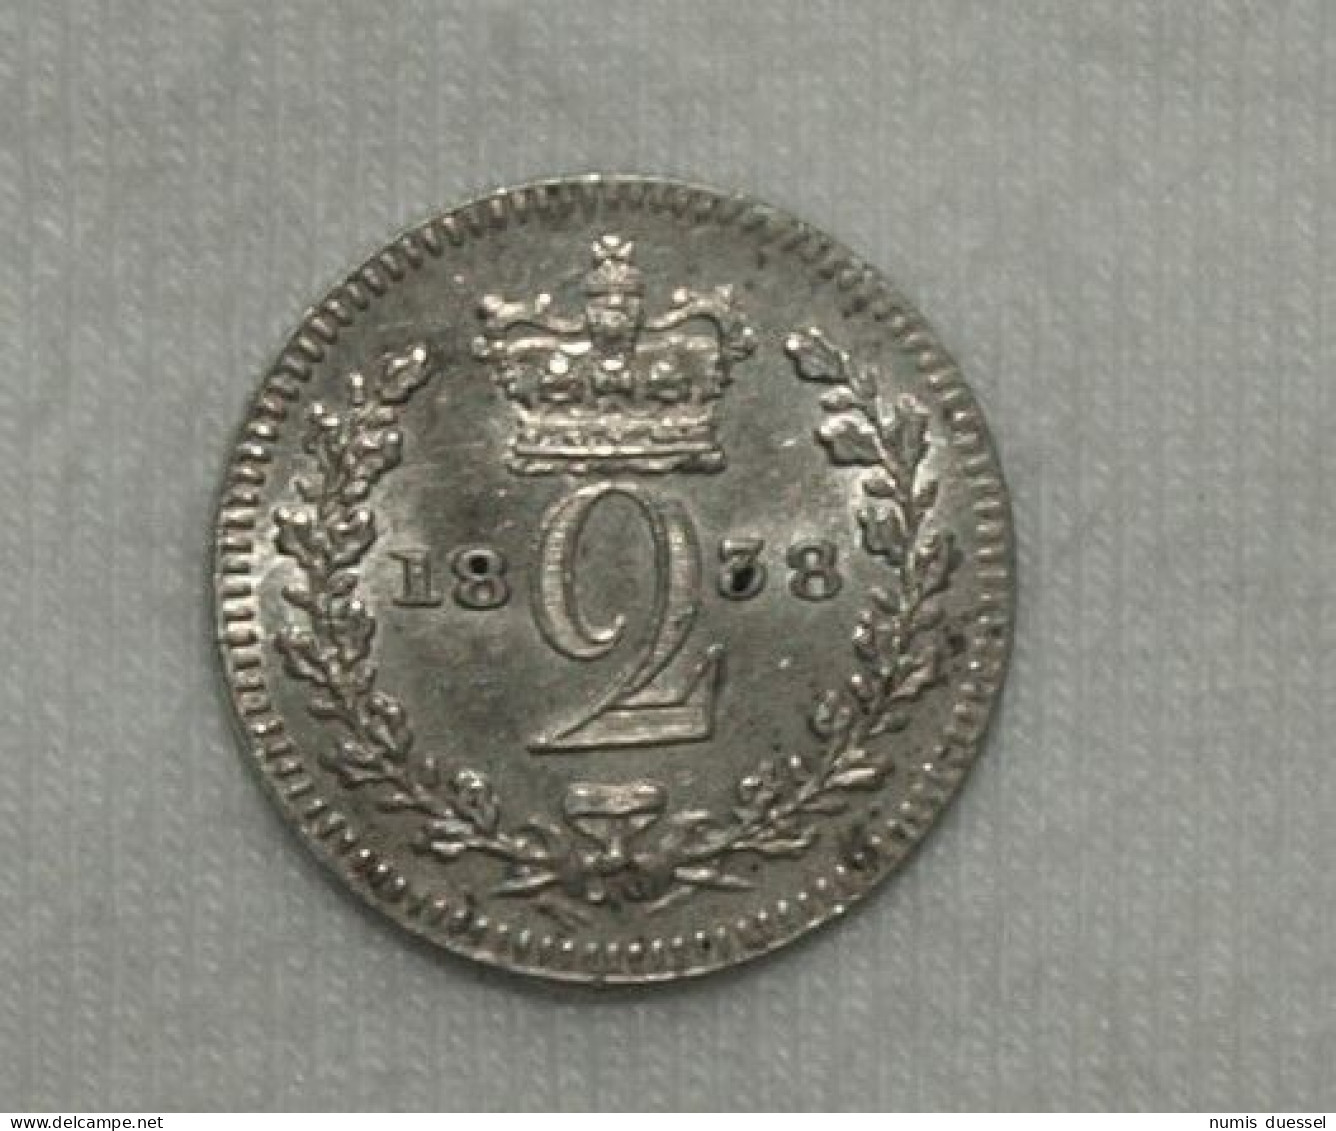 Silber/Silver Prooflike Maundy Großbritannien/Great Britain Victoria Young Head, 1838, 2 Pence UNC - Maundy Sets & Commémoratives